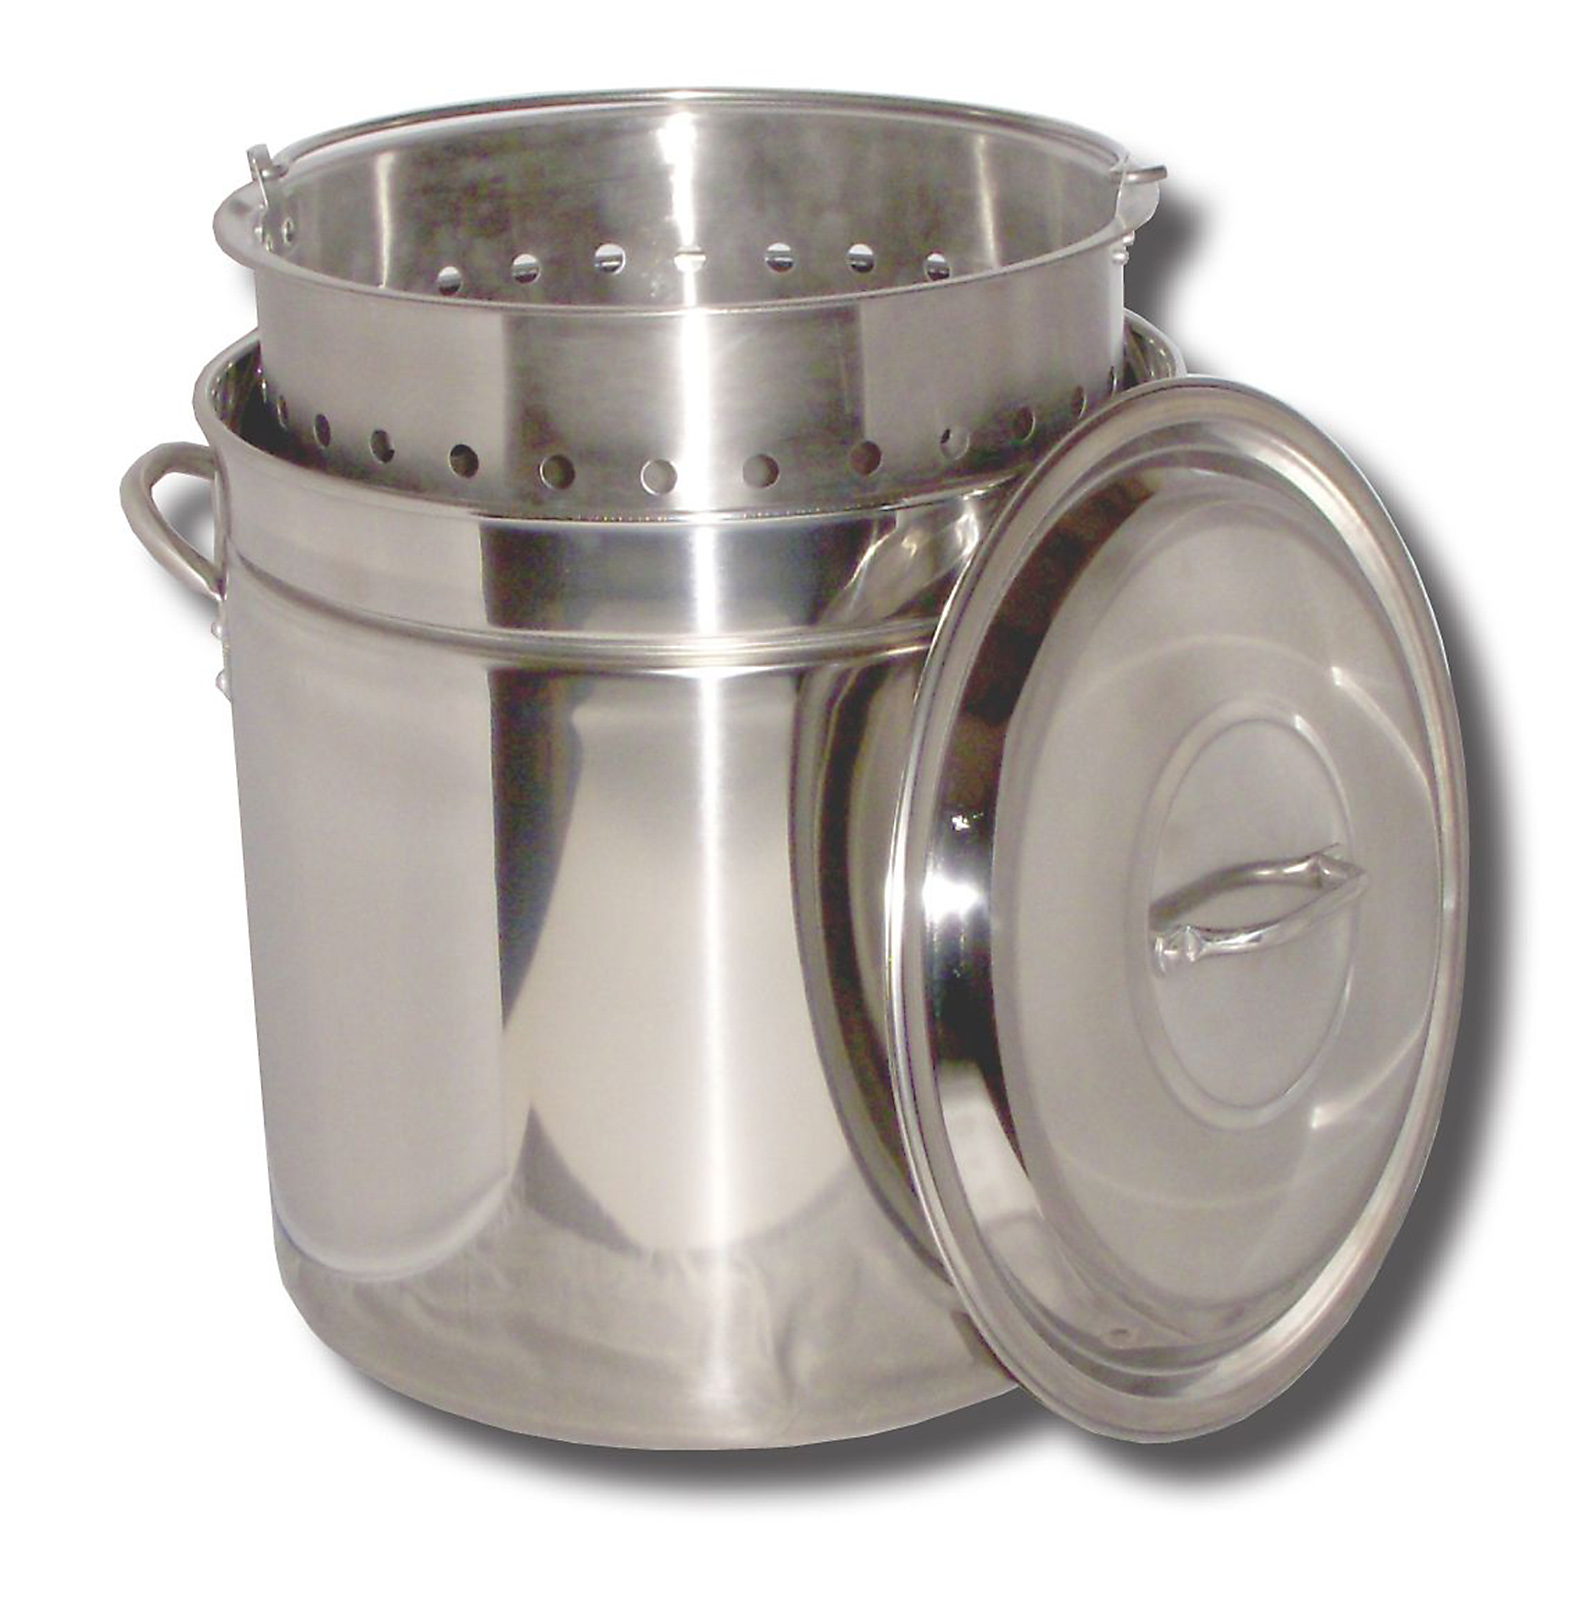 King Kooker&reg; 36 Qt. Stainless Steel Boiling Pot with Steam Ridge. Great for Boiling and Steaming!